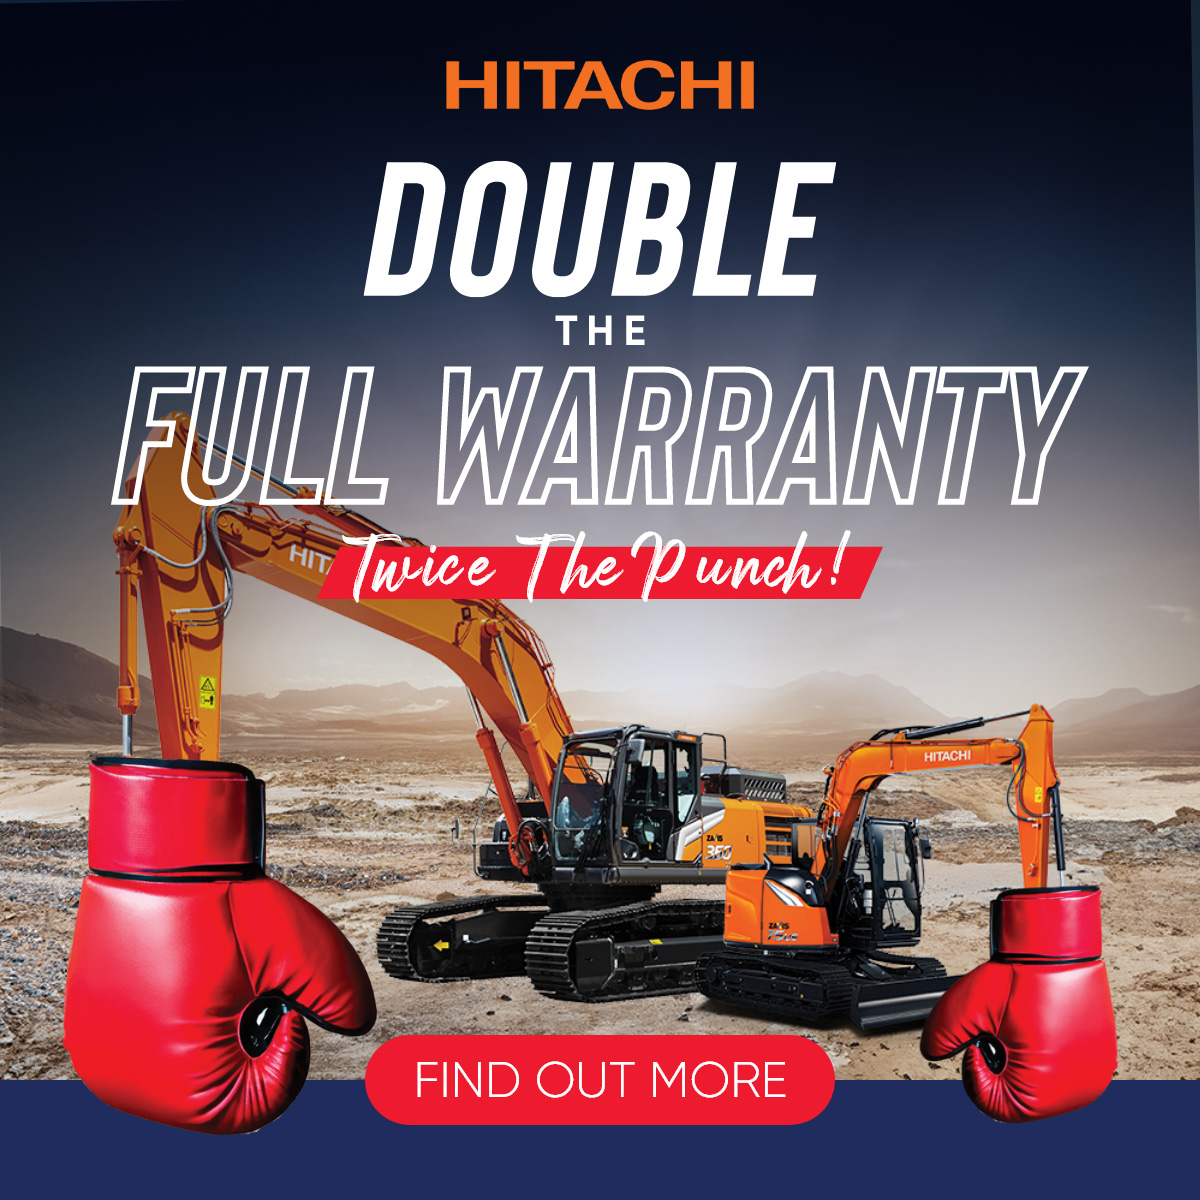 Find our more about our extended full warranty